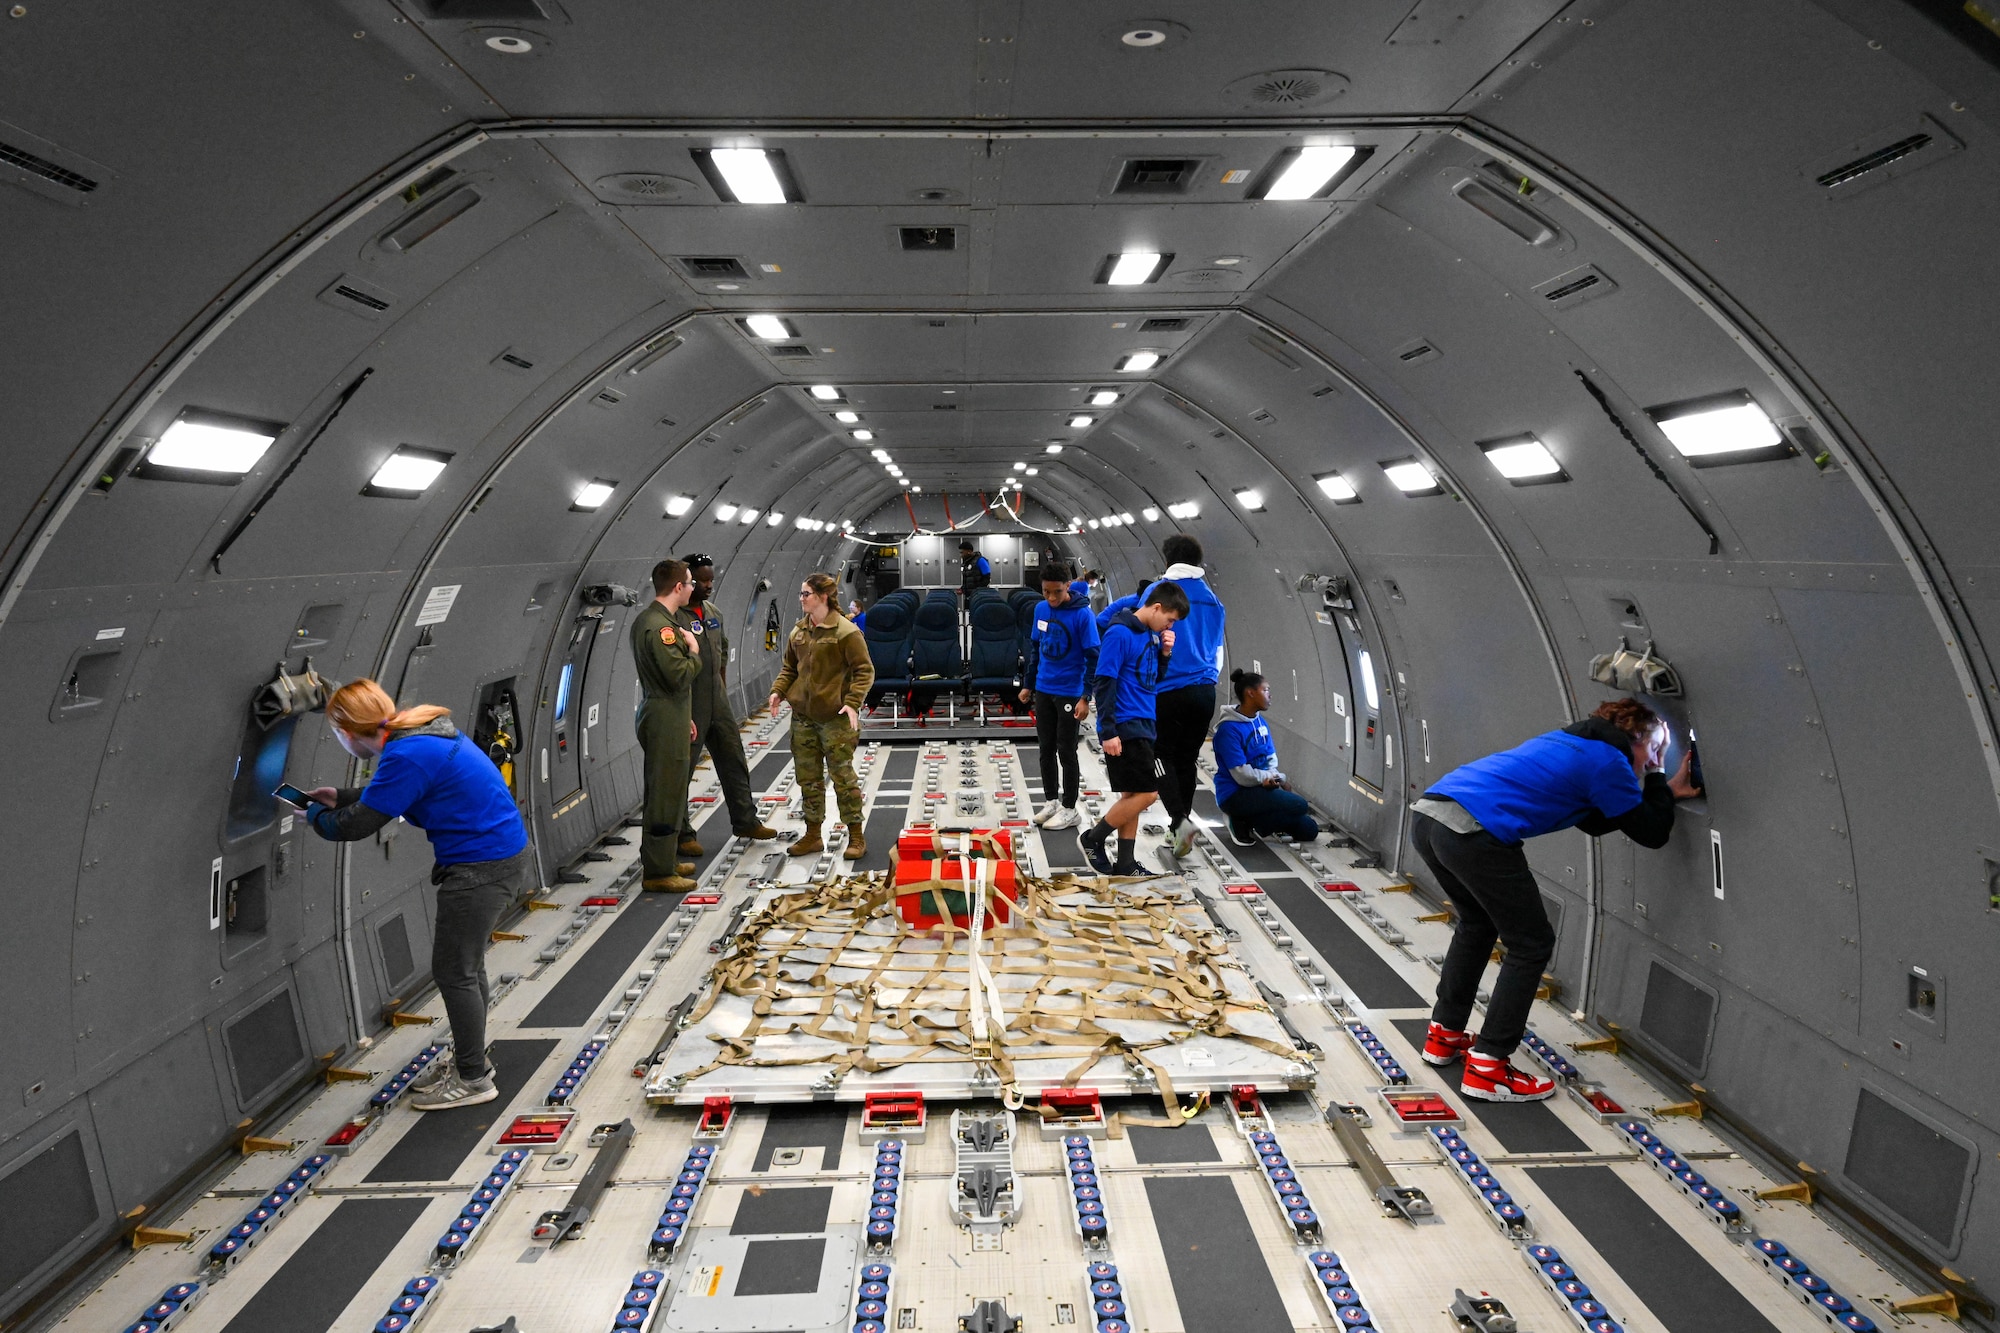 Legacy Flight Academy students explore the cargo area of a KC-46 Pegasus at Joint Base (JB) Charleston, South Carolina, Feb. 18, 2023. The students spent the day on the JB Charleston flightline interacting with Airmen and exploring several different Air Force aircraft. (U.S. Air Force photo by Senior Airman Trenton Jancze)